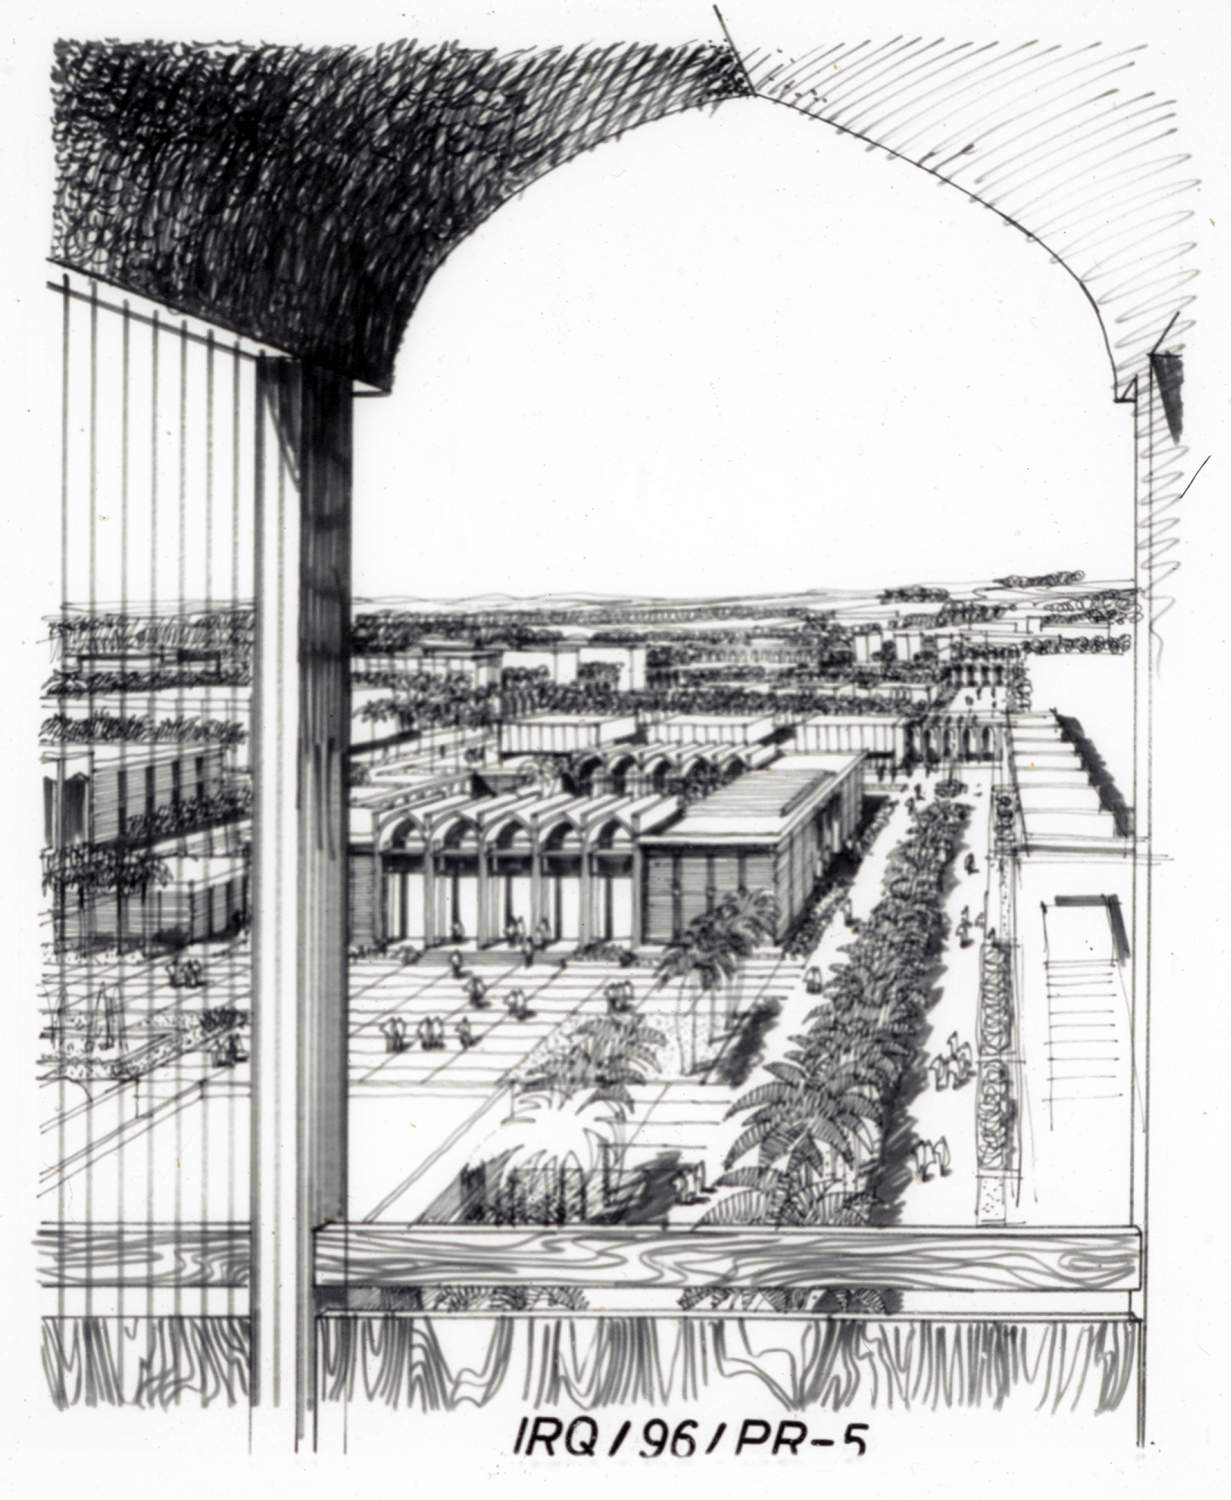 Ink drawing showing out over campus from a multilevel building.